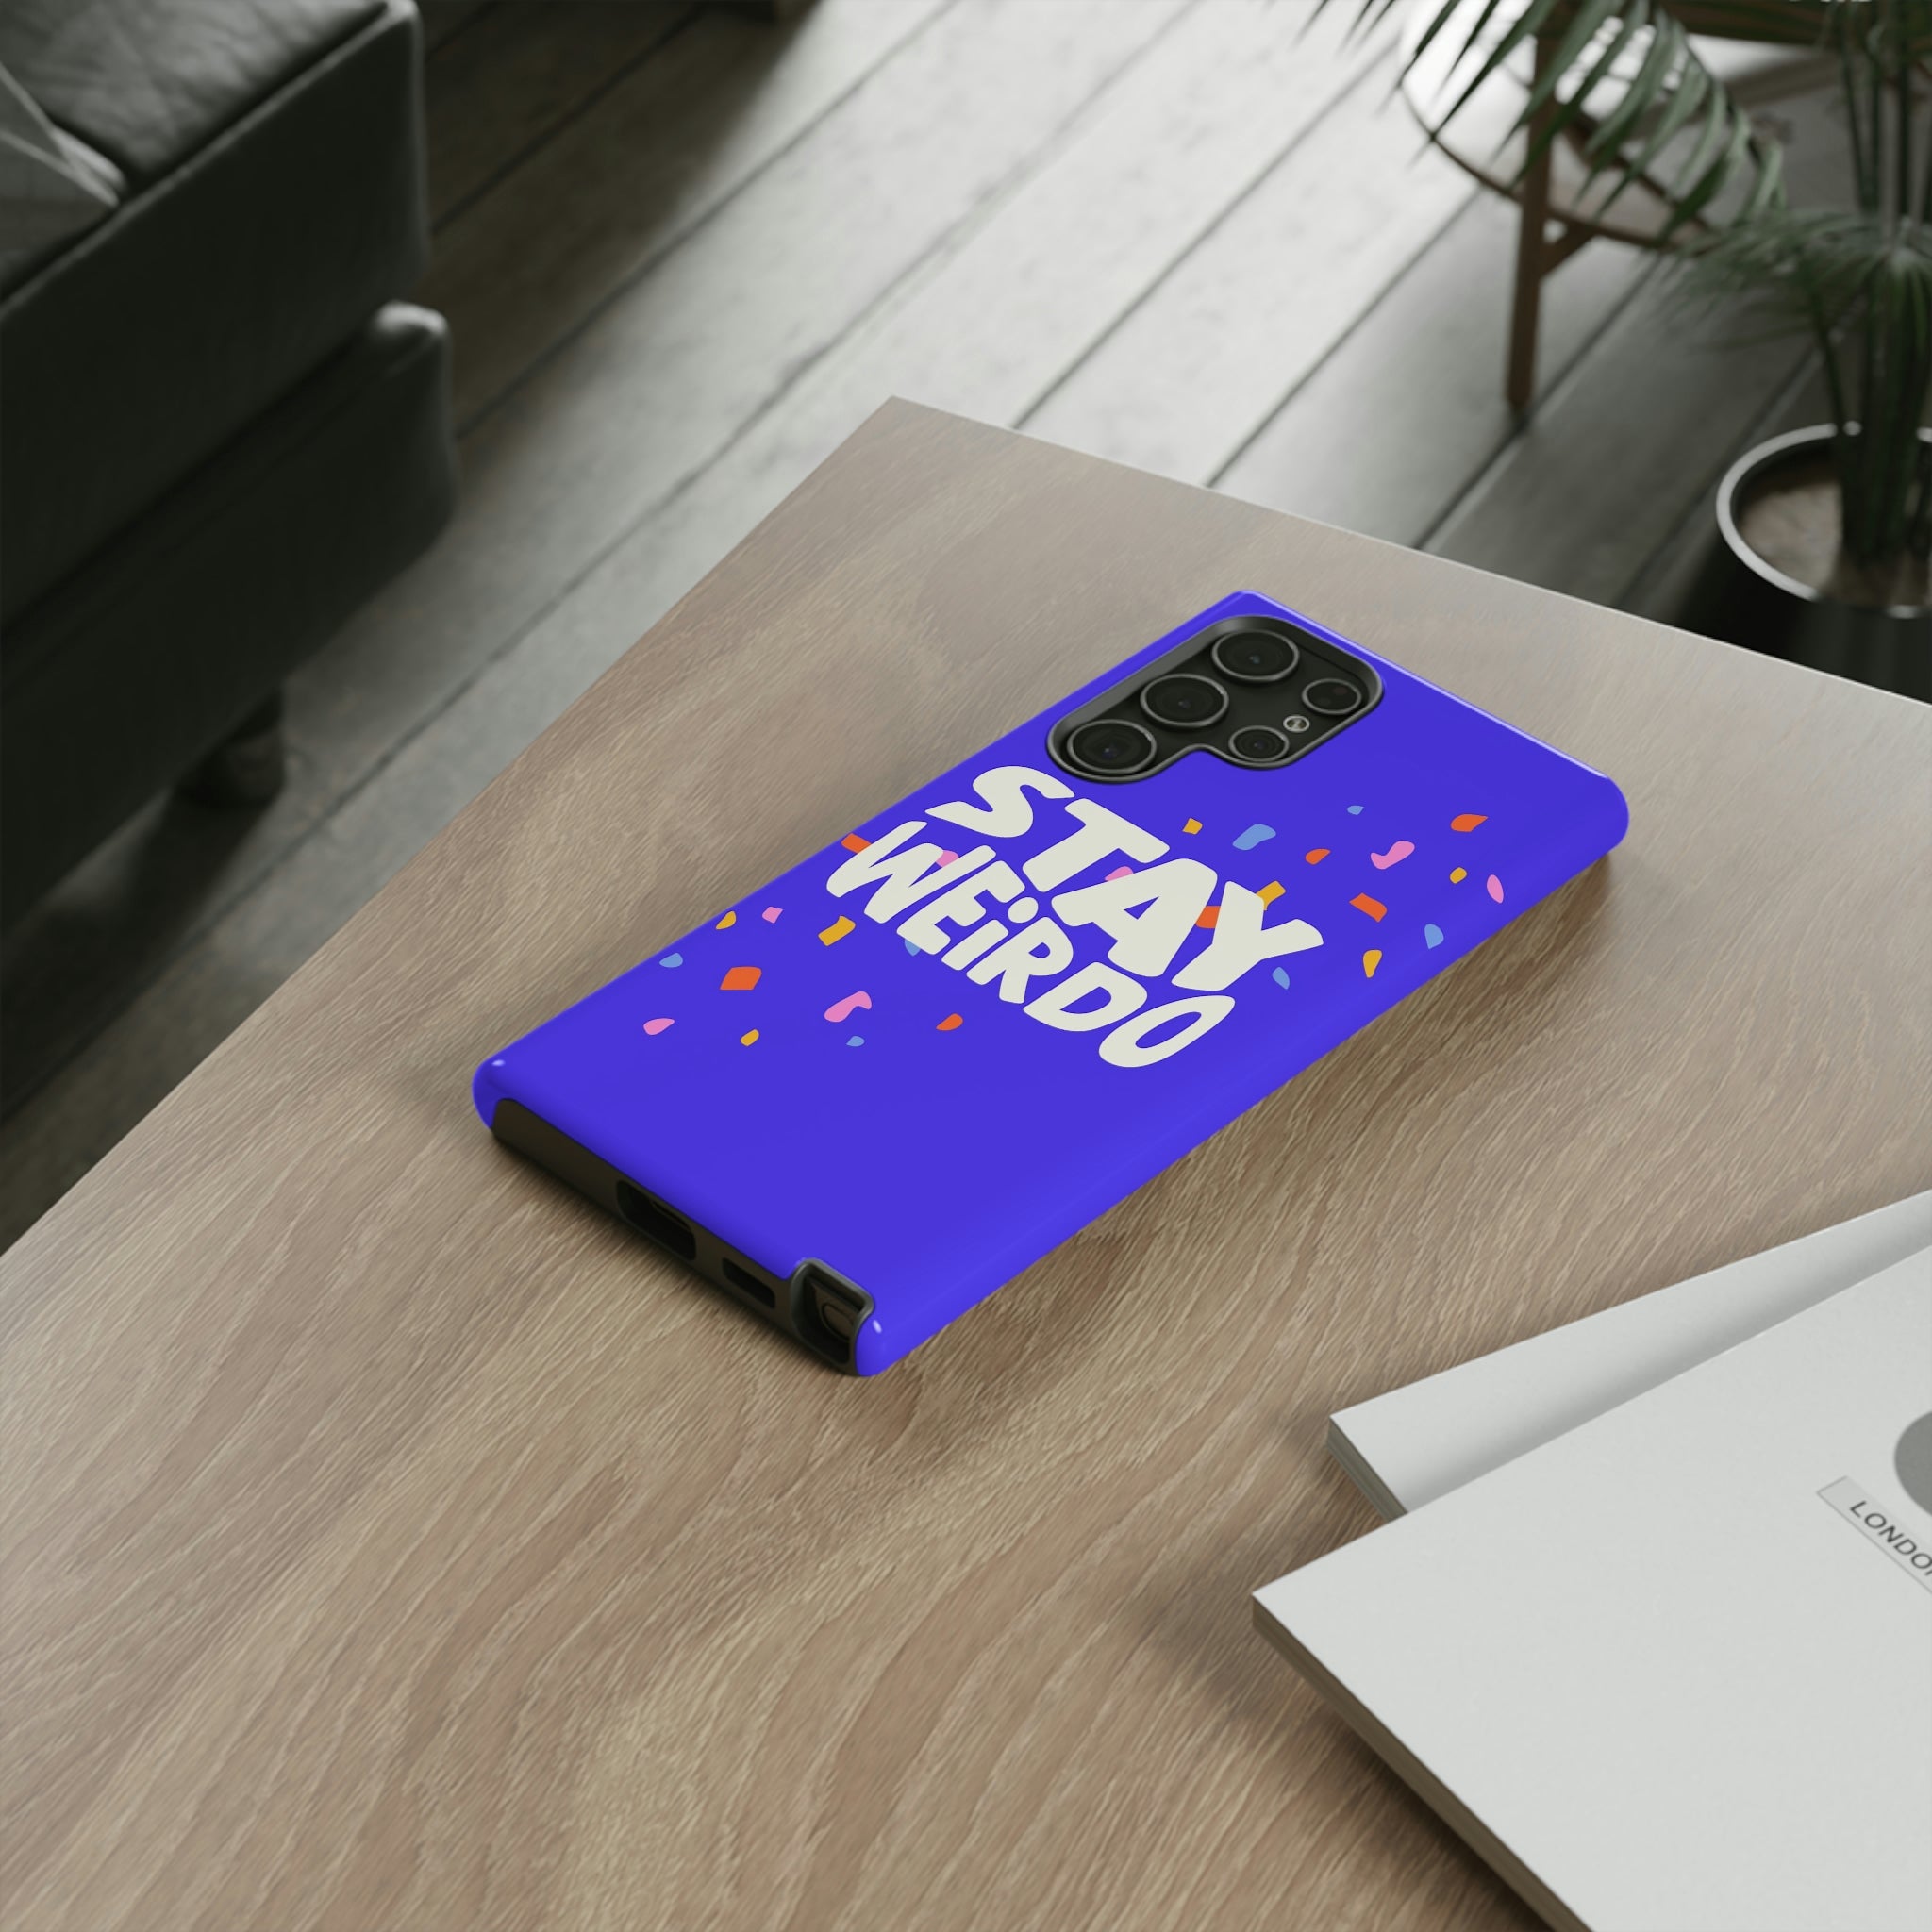 Stay Weirdo Phone Case - Time's Reel